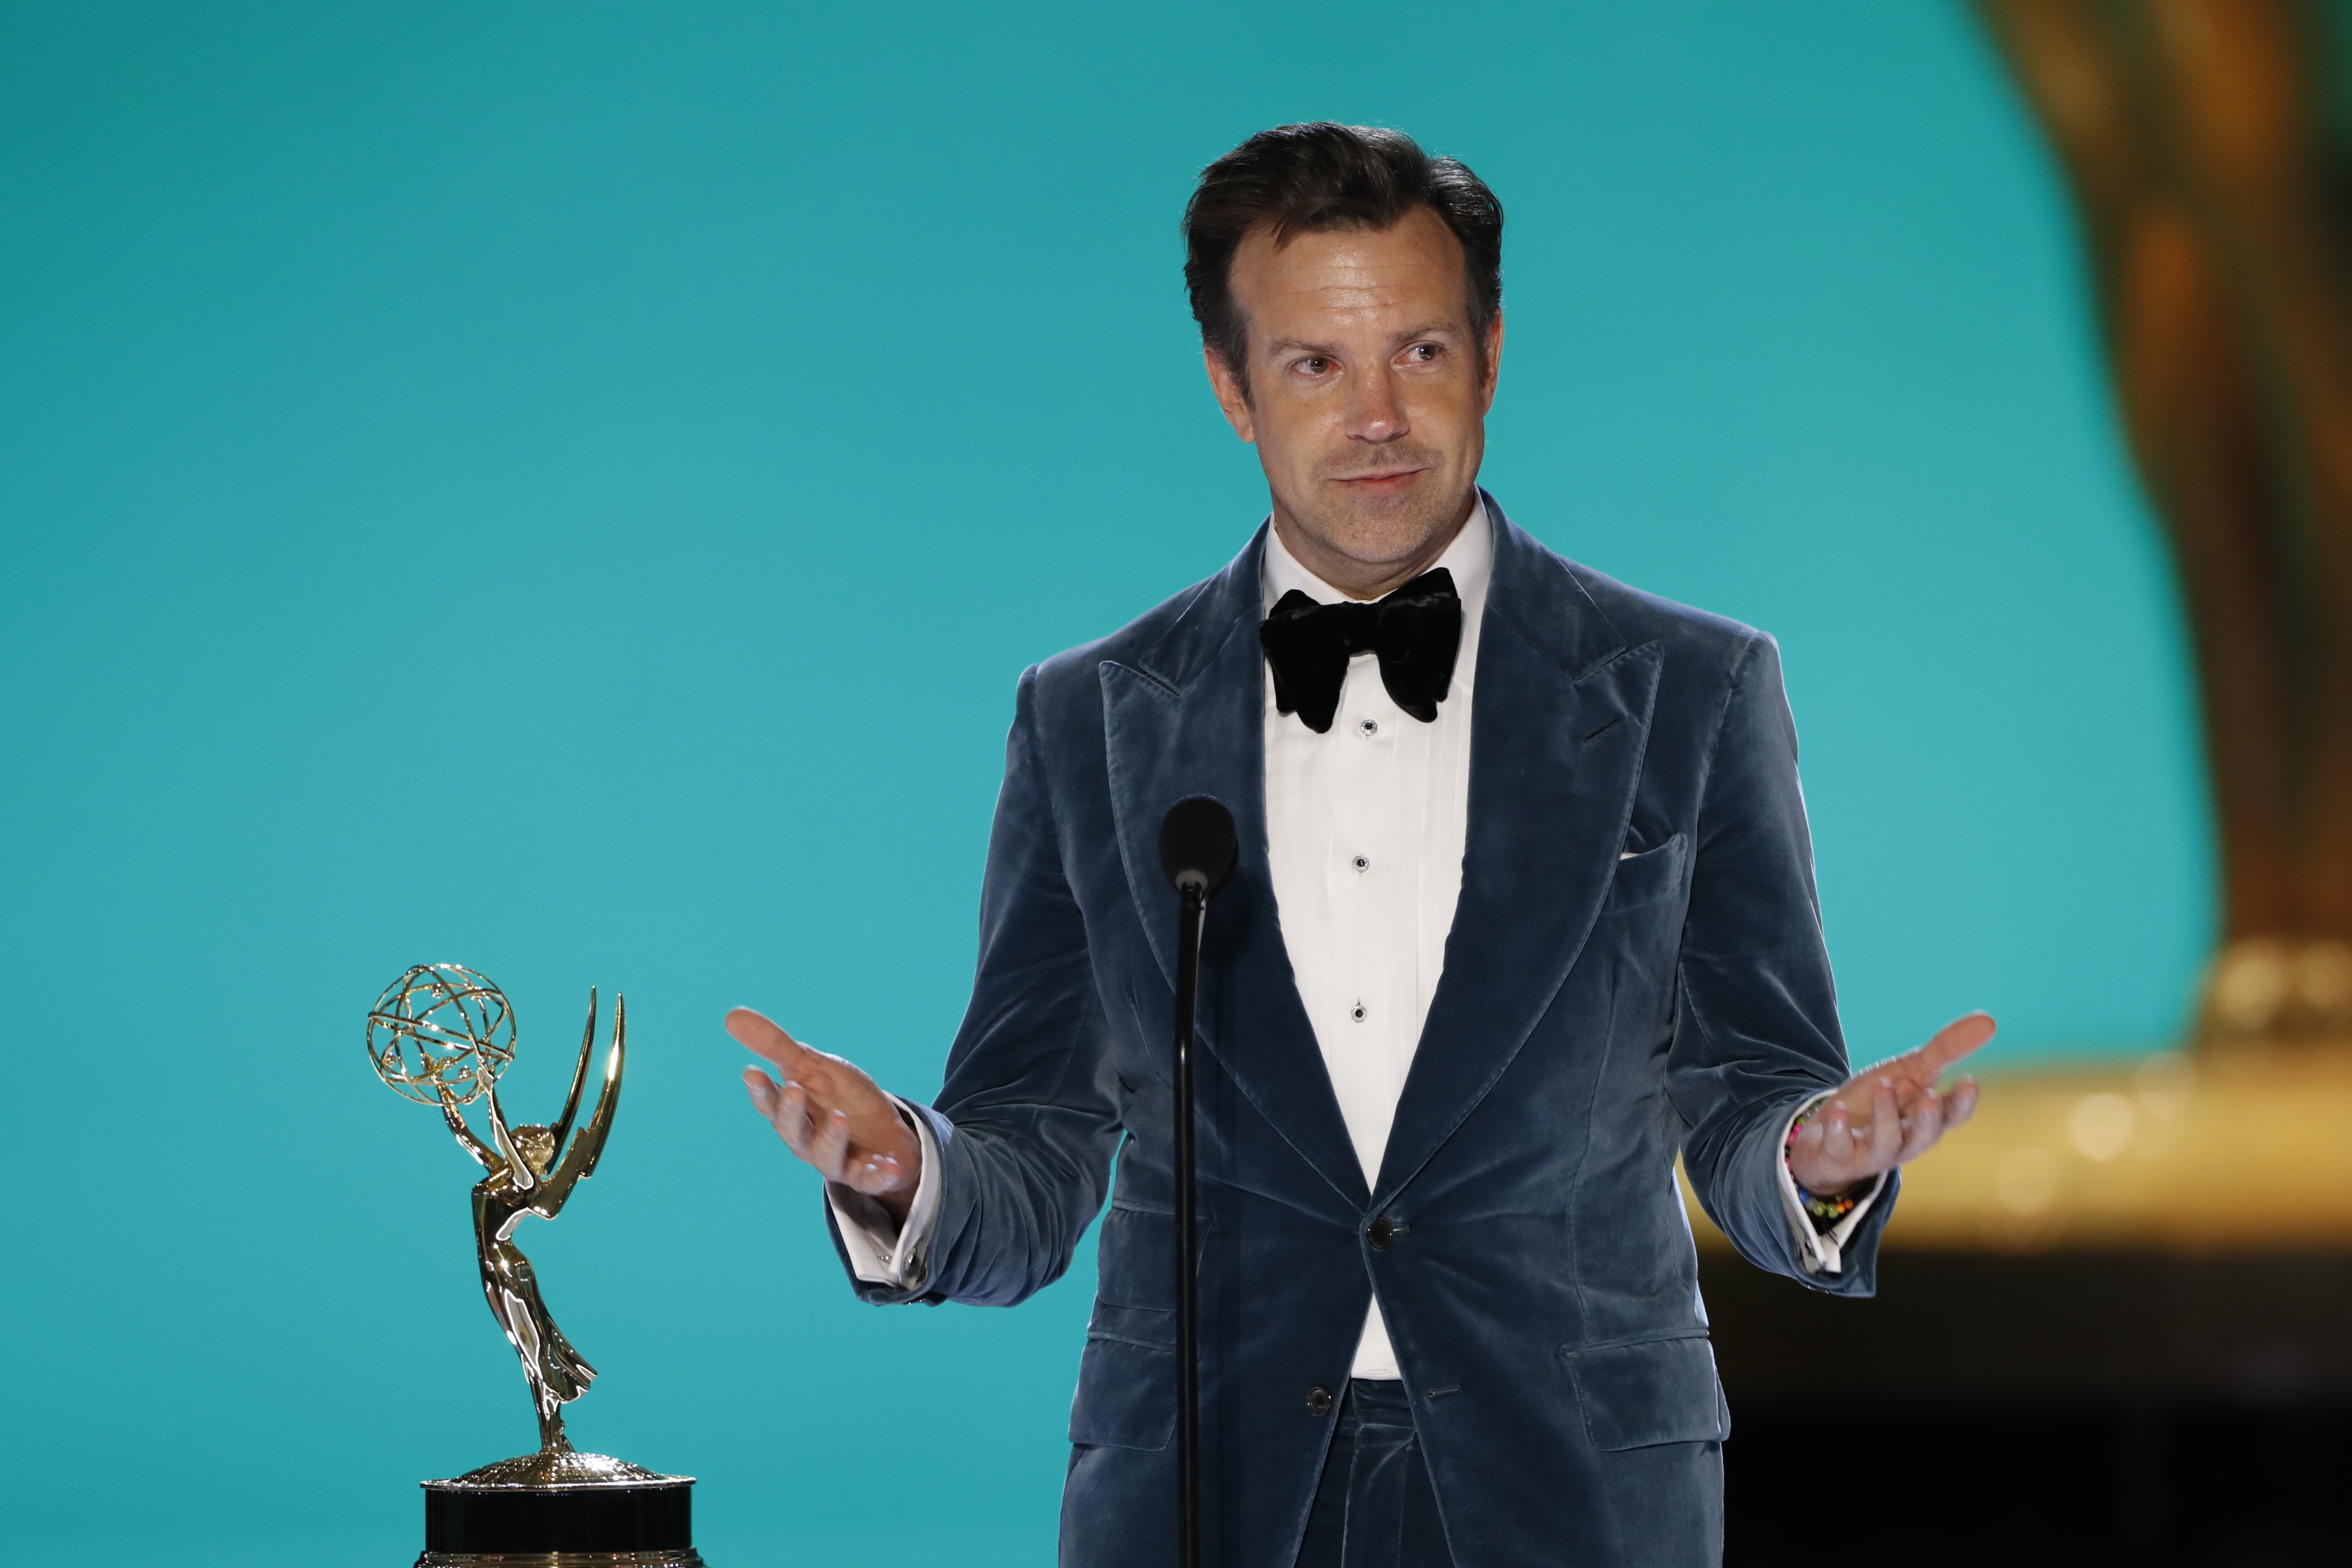 Jason Sudeikis makes his Emmy Award speech for Outstanding Lead Actor in a Comedy for Ted Lasso